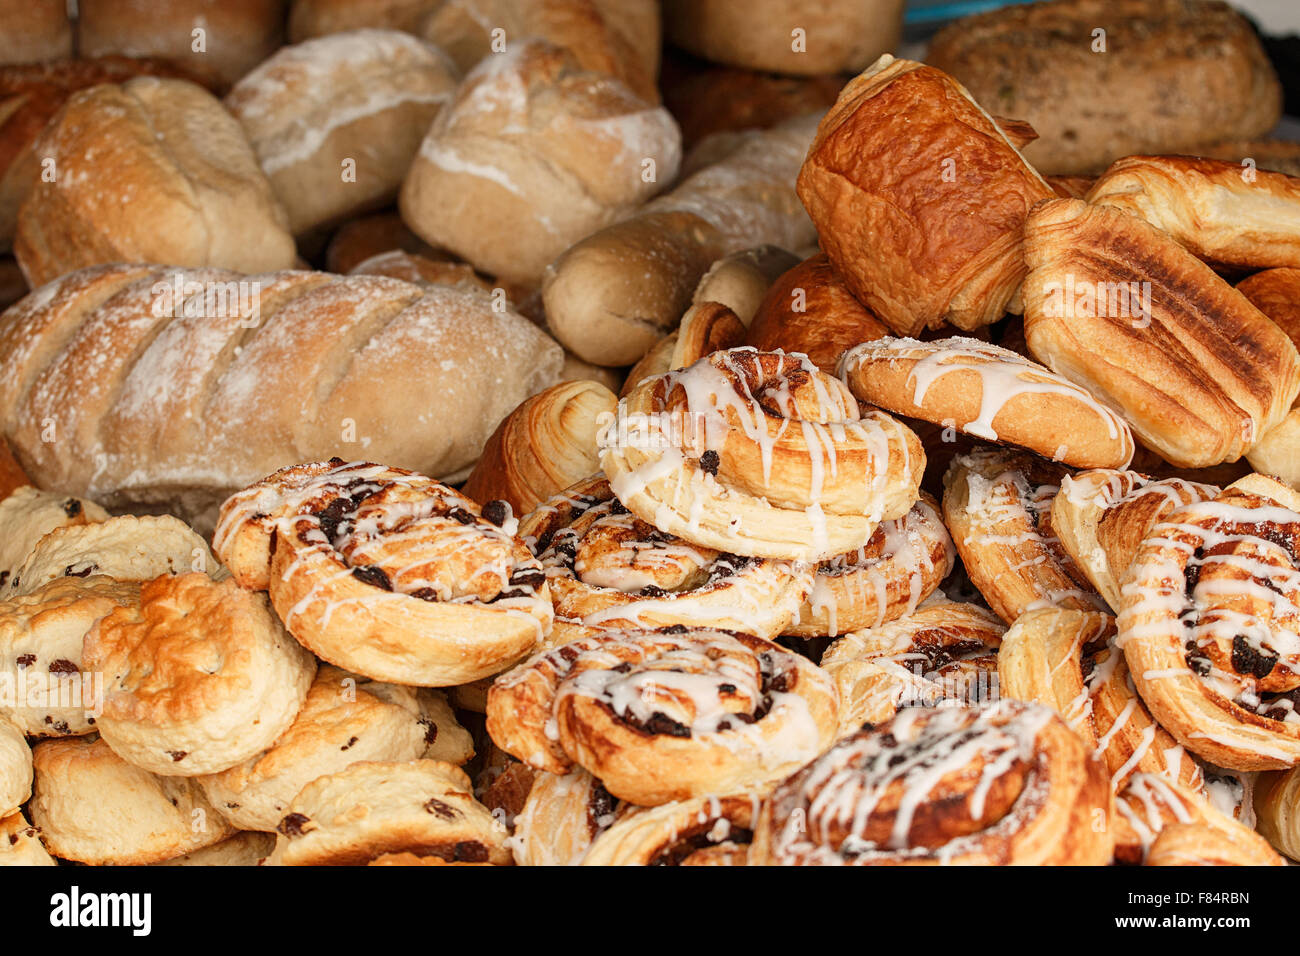 Selection of baked goods available from specialised bakers including buns; scones; pain au chocolate; pain; cobbs and other brea Stock Photo